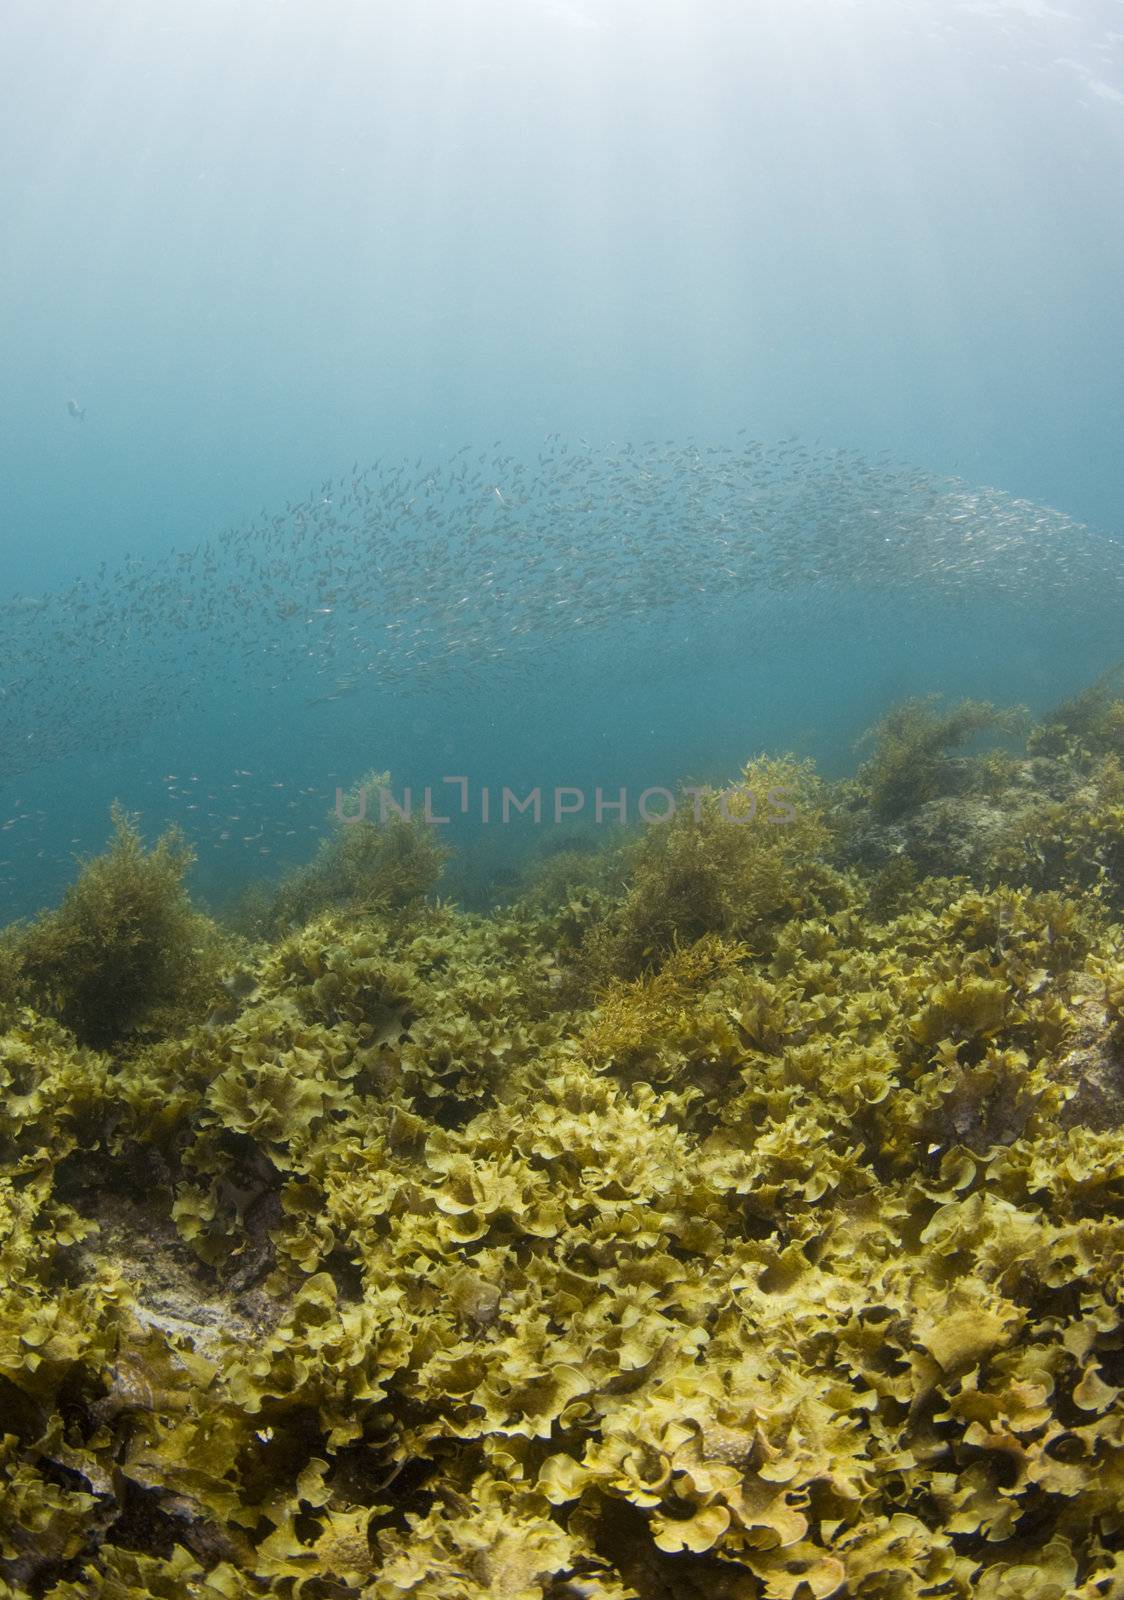 A school of baitfish swim above the vegetation growing on the bottom of the Sea of Cortez, Mexico